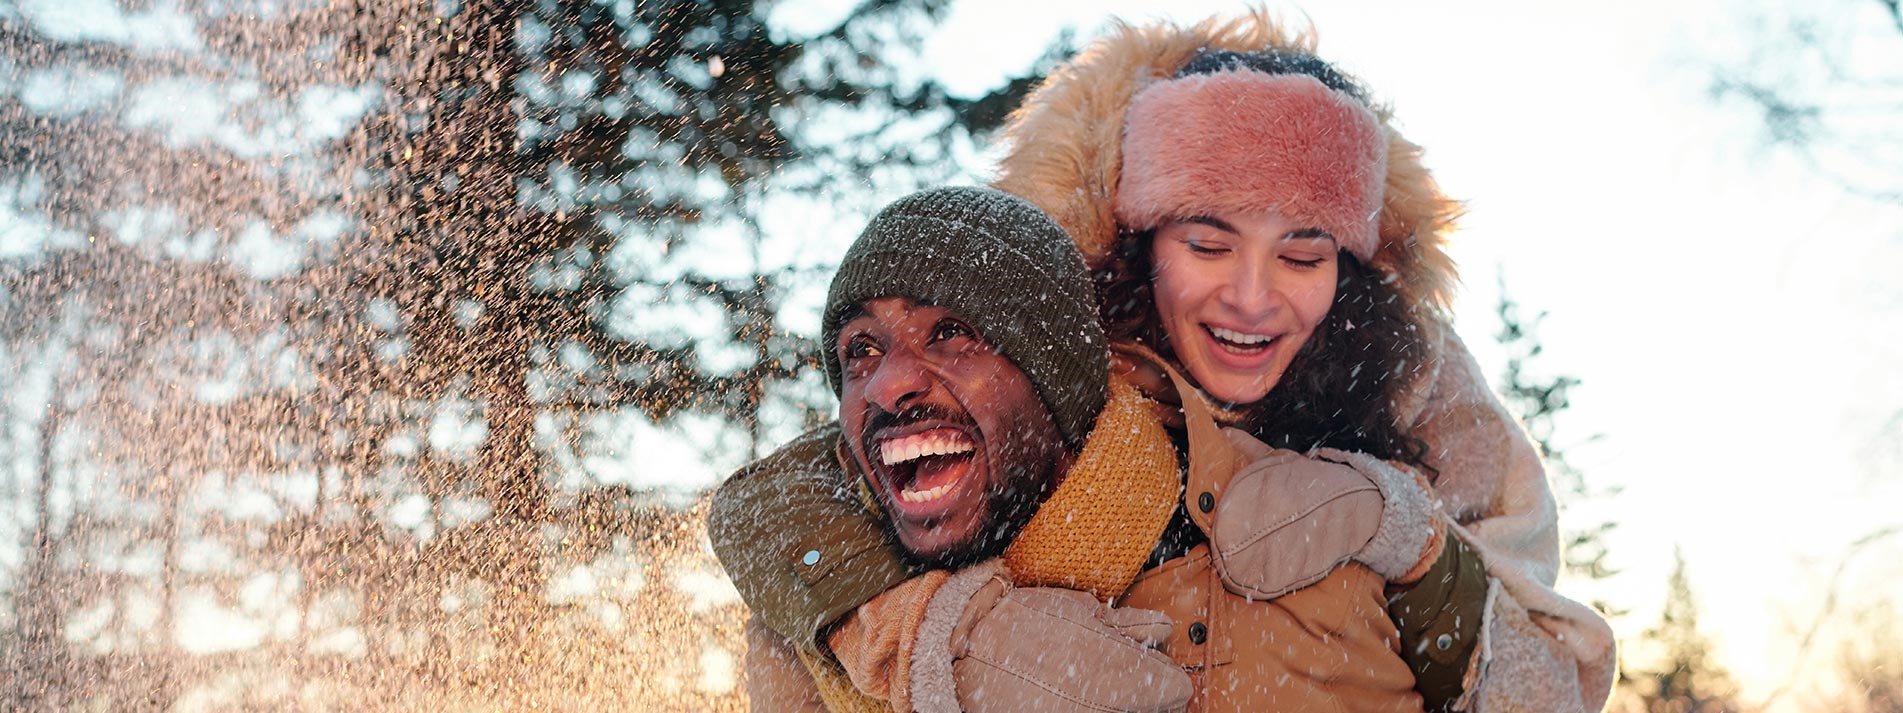 Cheerful Multiracial Couple In Winterwear Laughing While Girl Embracing Her Boyfriend